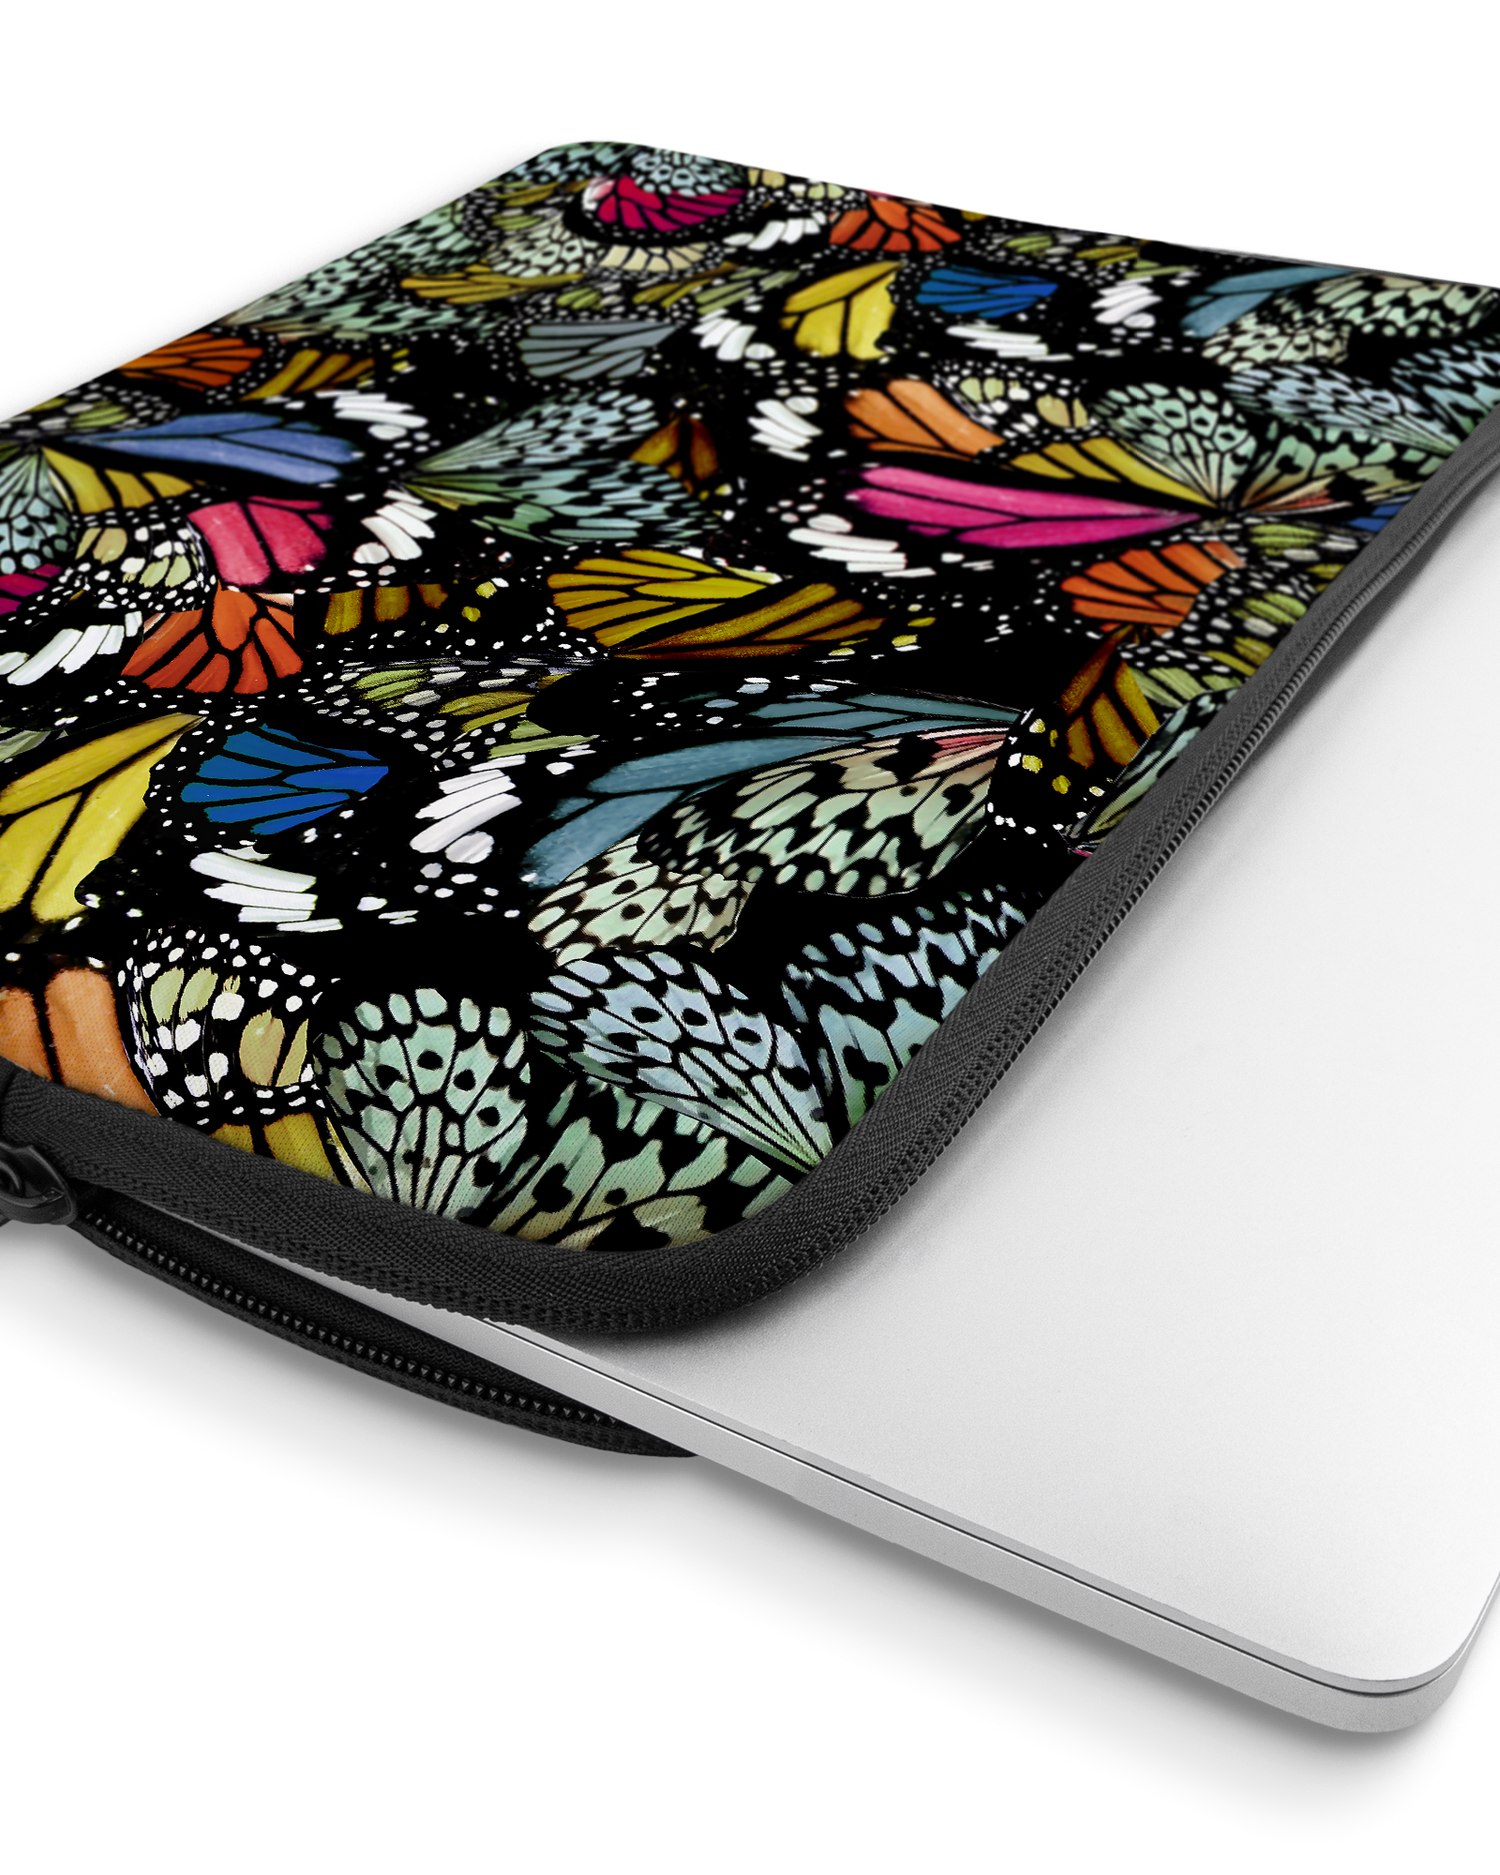 Psychedelic Butterflies Laptop Case 13 inch with device inside